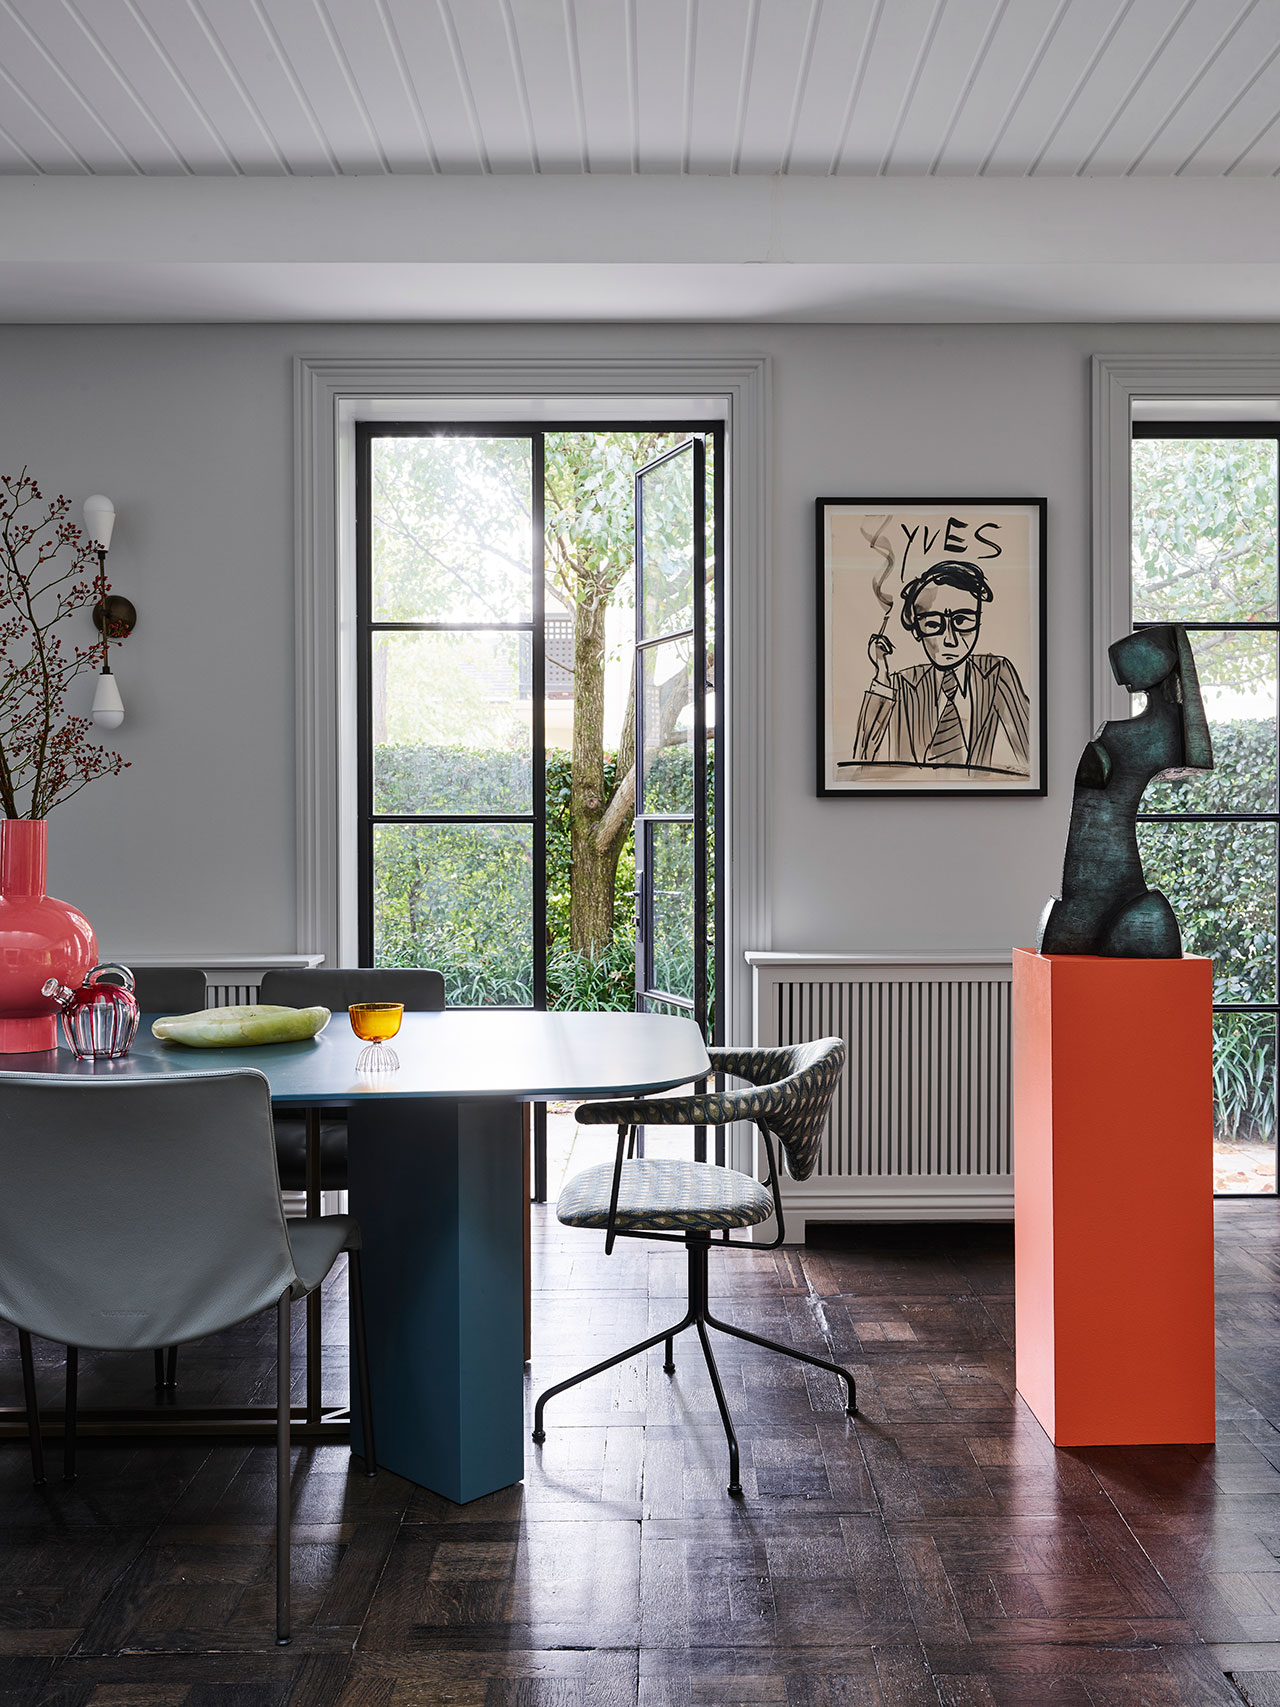 Art House by Studio CD - Claire Driscoll Delmar. Dining room.
Photo by Anson Smart.